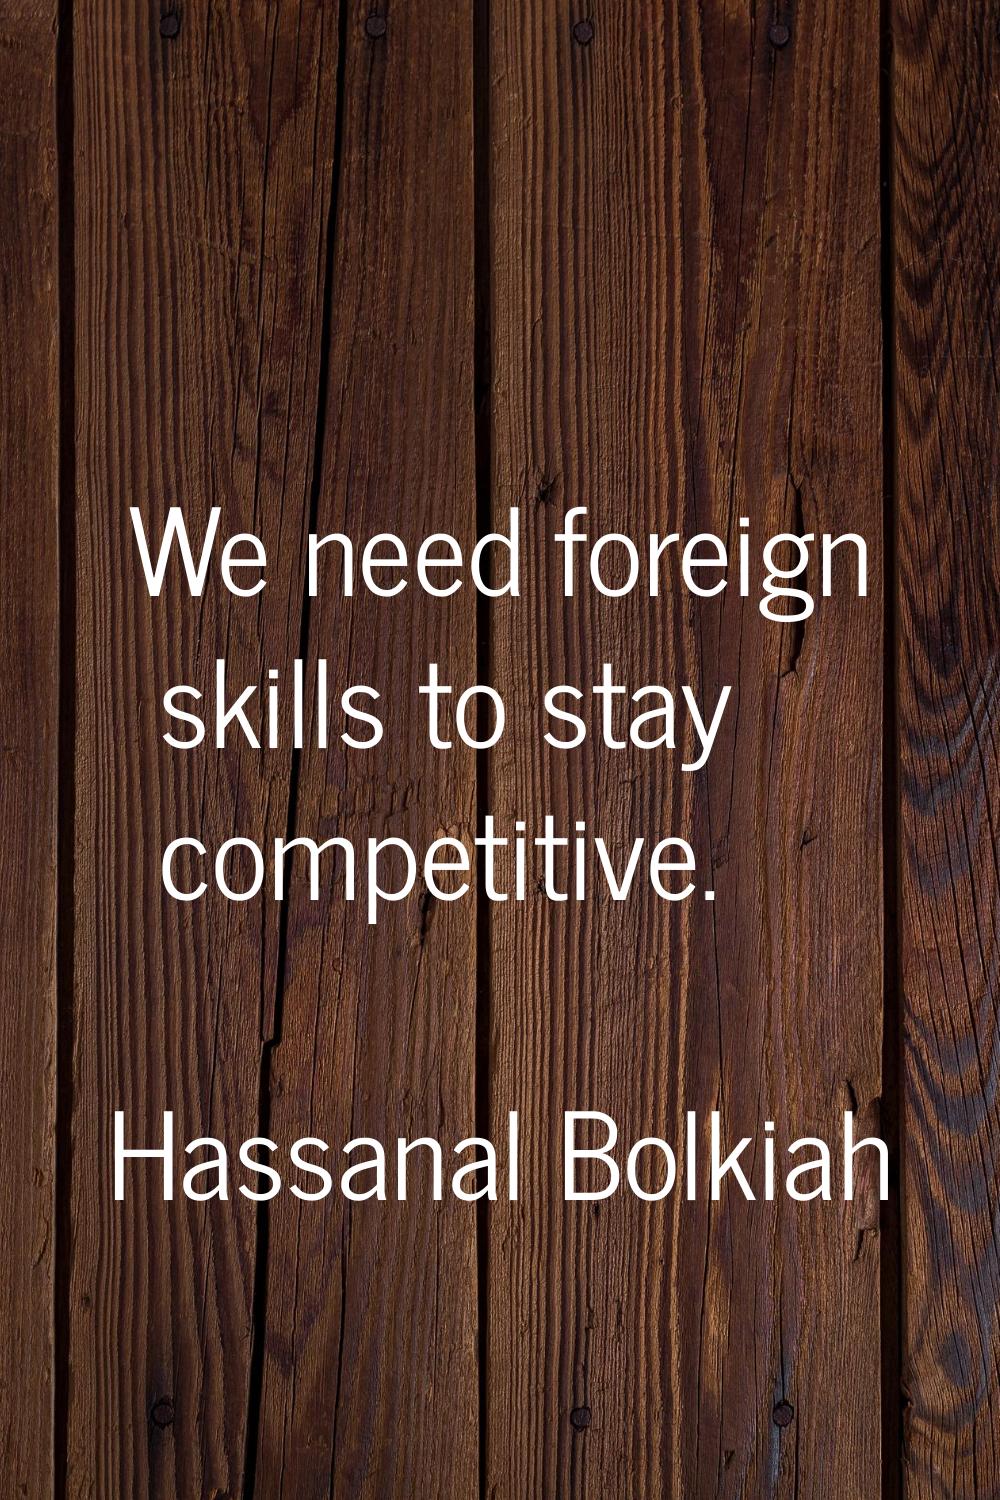 We need foreign skills to stay competitive.